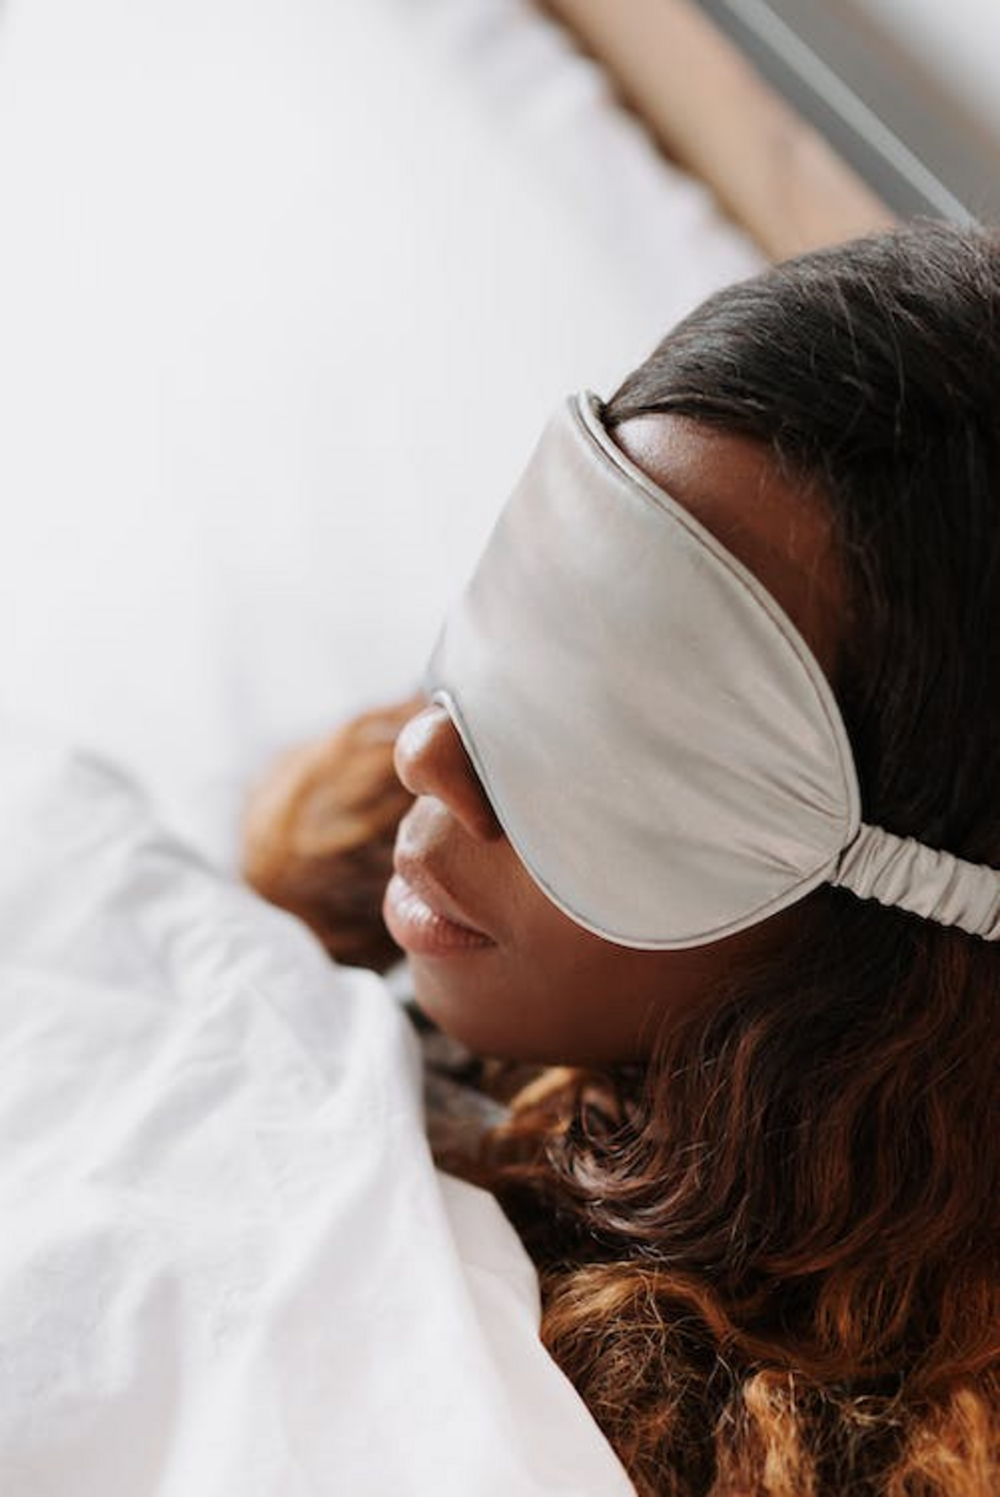 A person sleeping with an eye mask